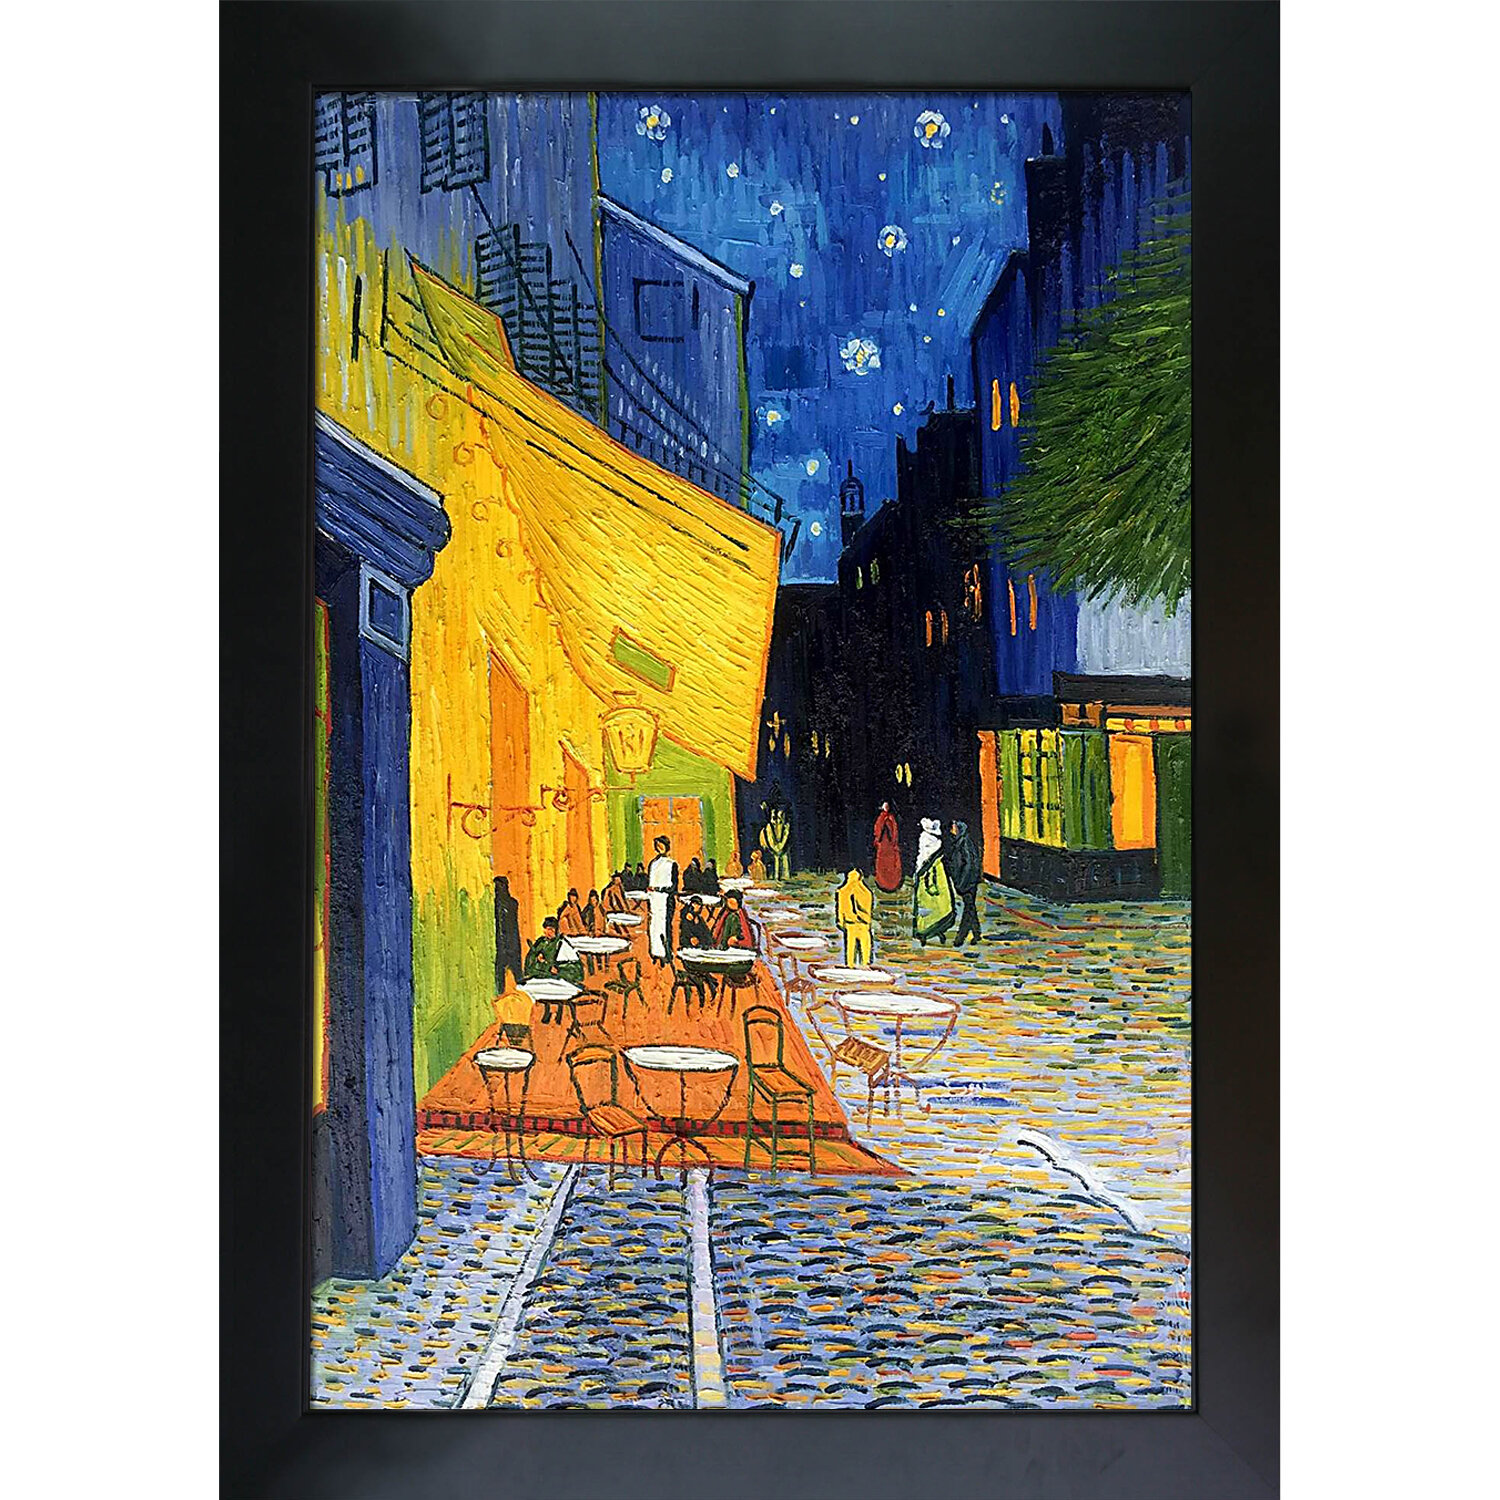 The Cafe Terrace at Night Paint by Van Gogh Reprint On Framed Canvas Wall Art